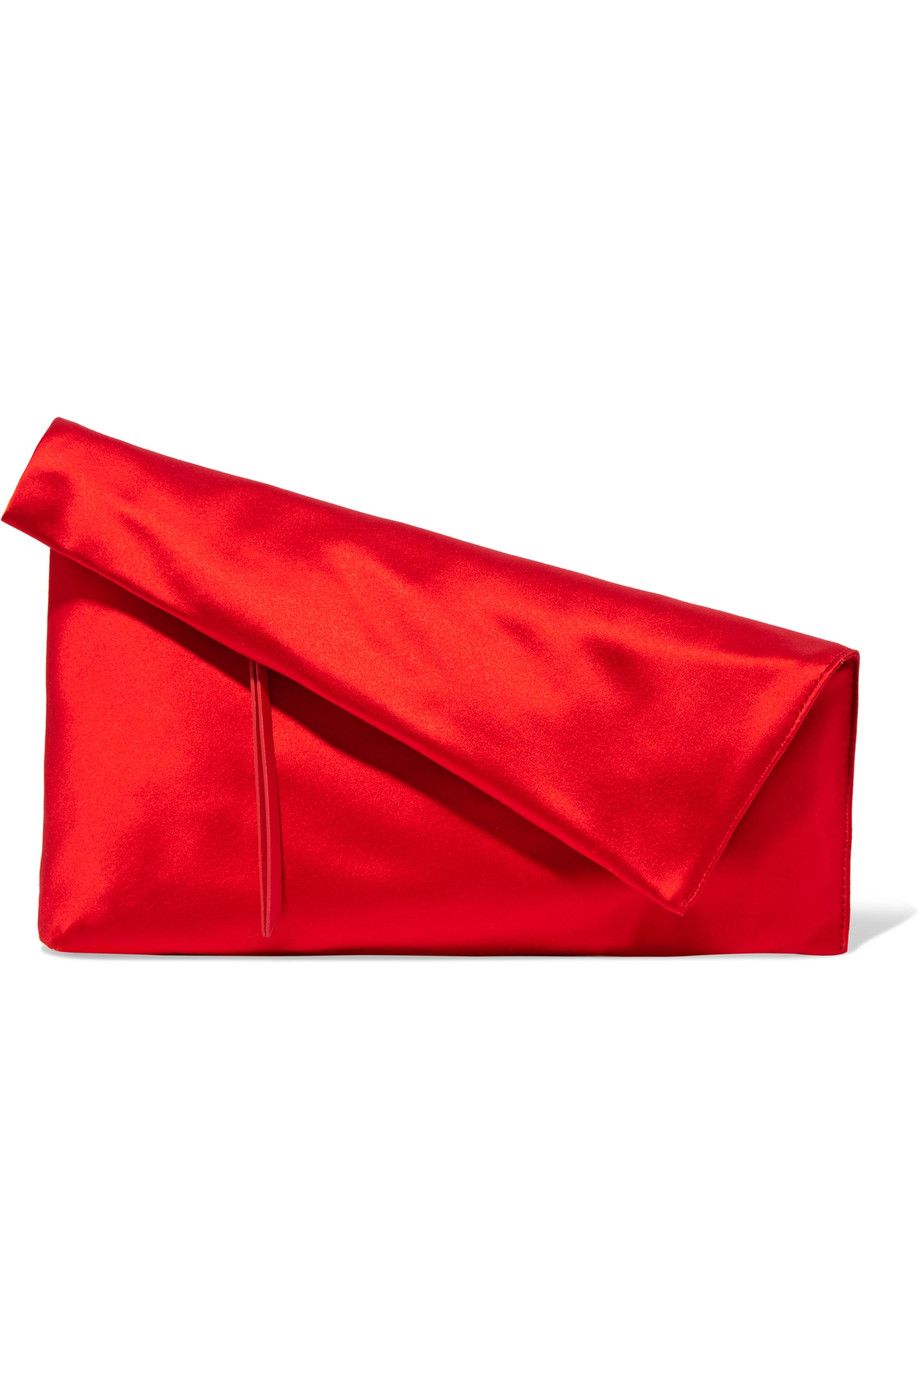 Textile, Red, Bag, Rectangle, Carmine, Maroon, Wallet, Leather, Linens, Cushion, 